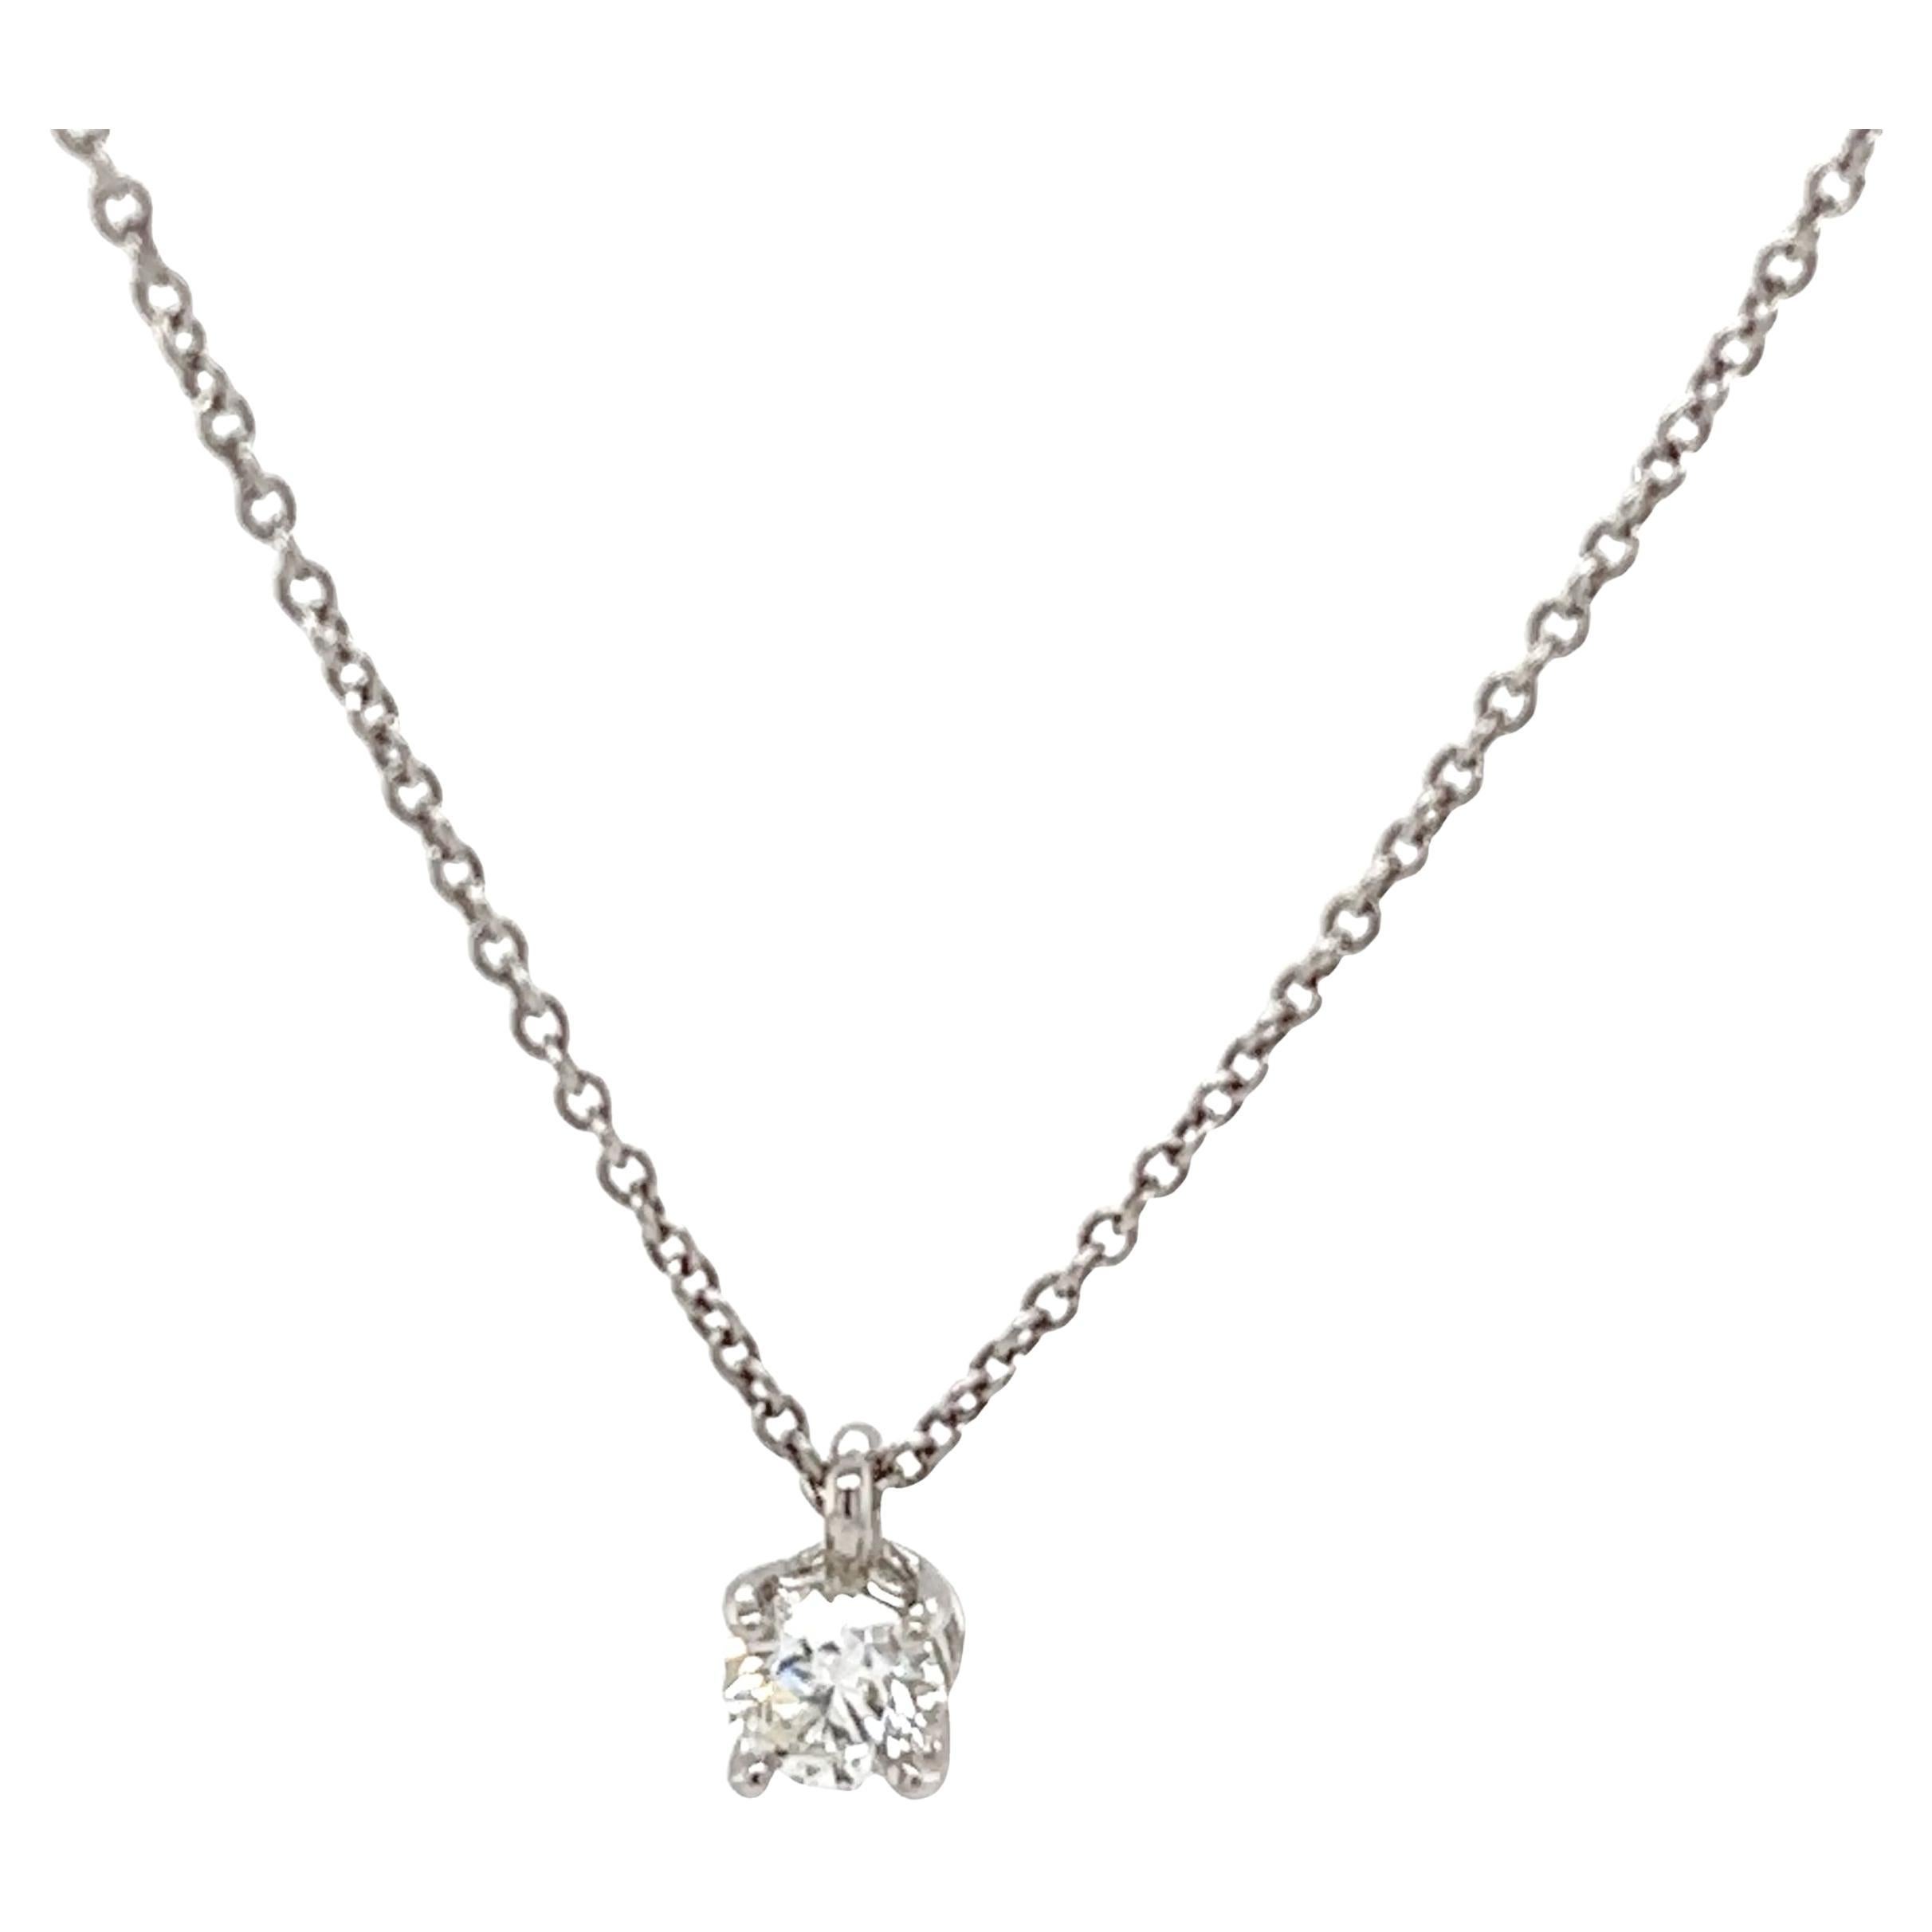 Tiffany & Co. solitaire diamond necklace 0.24ct on 16" Platinum chain